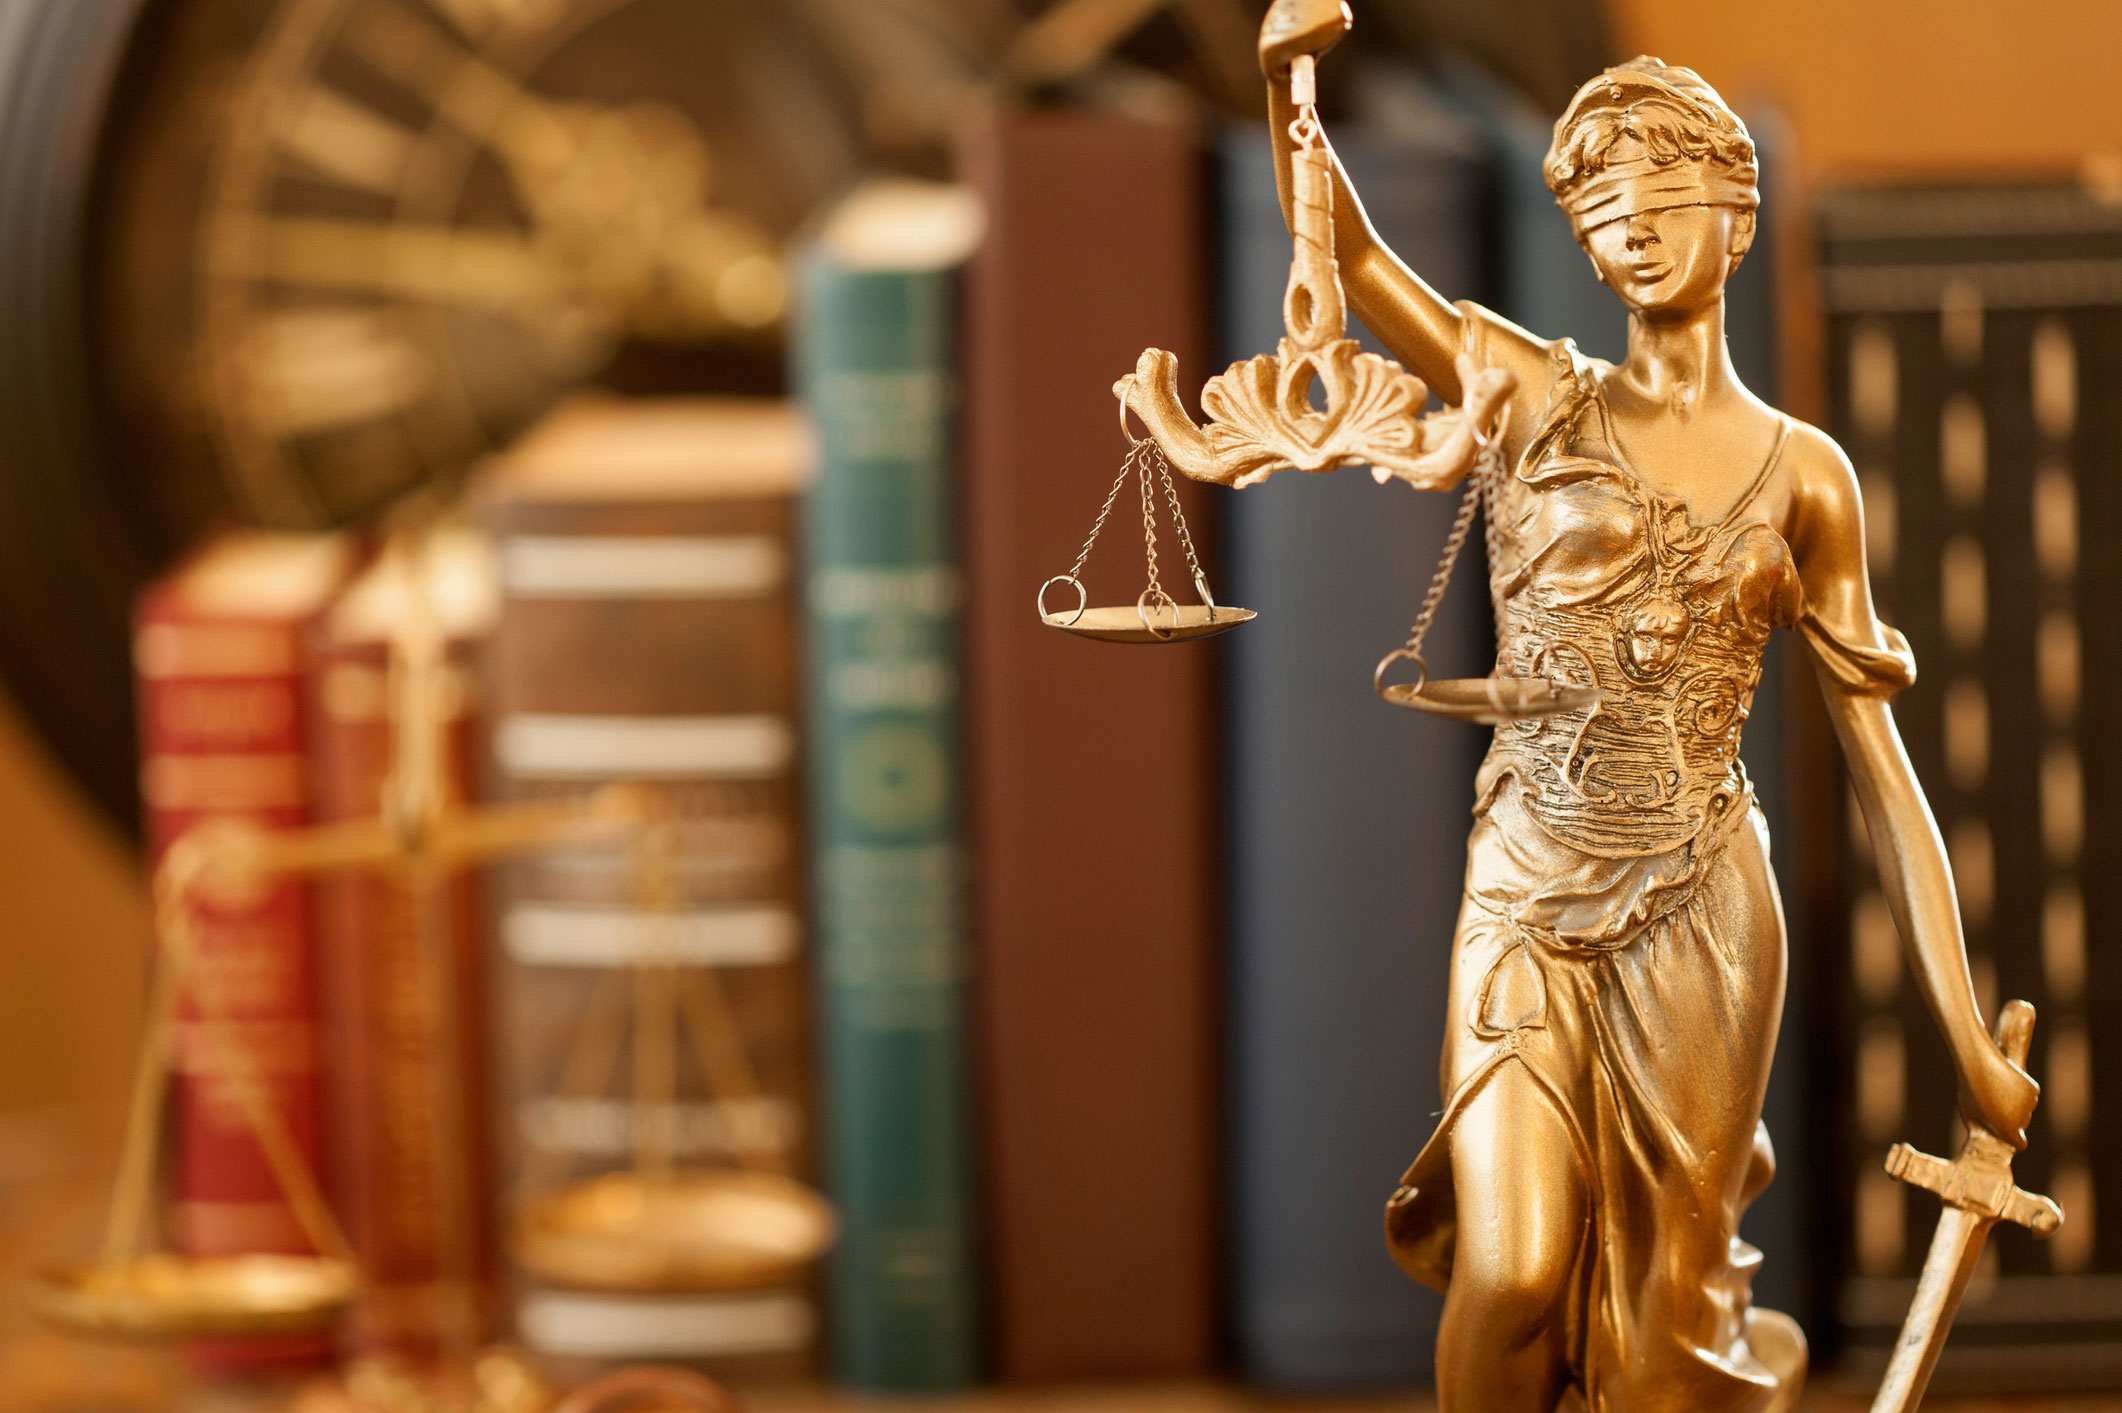 Law-justice-statue-in-front-of-books